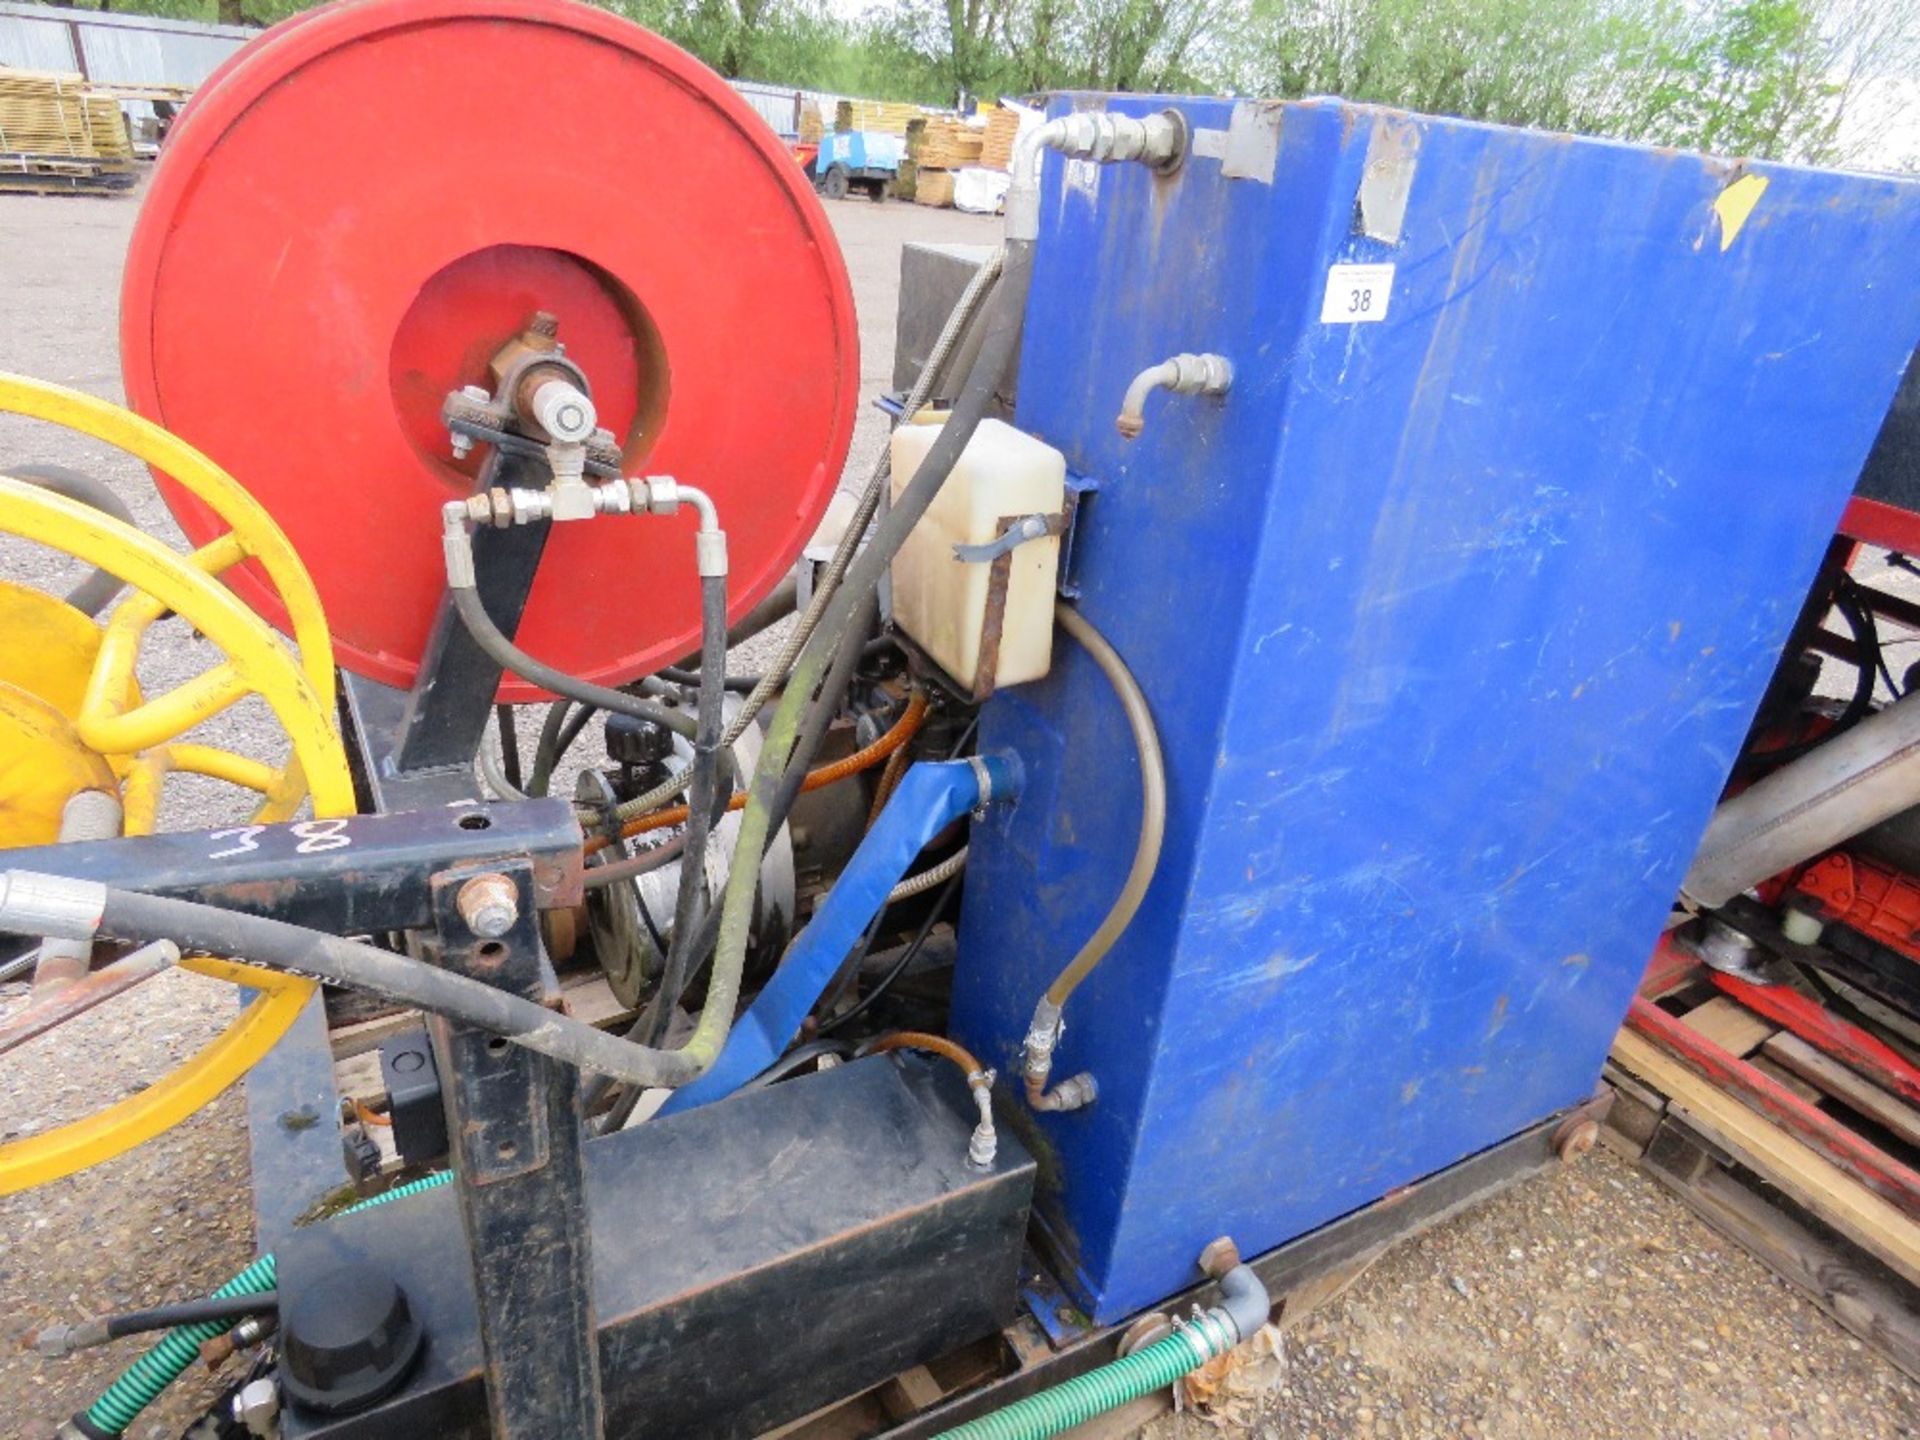 4 CYLINDER DIESEL ENGINED HIGH PRESSURE WASHER/JETTING MACHINE. UNTESTED, CONDITION UNKNOWN.